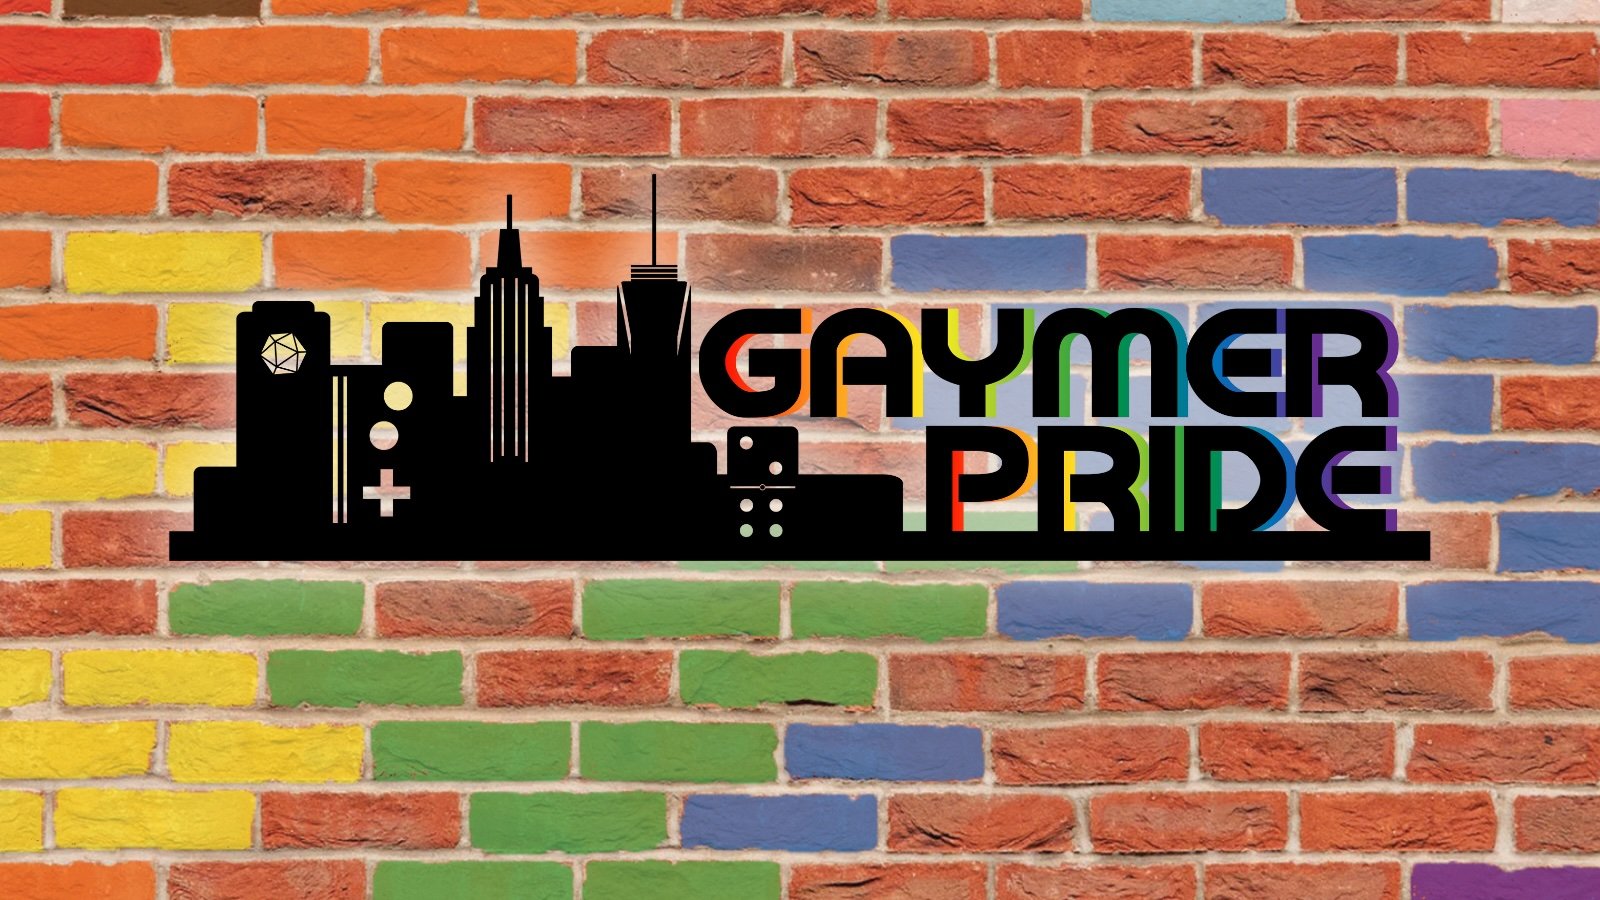 The words GAYMER PRIDE against a red brick wall with colorful green and blue bricks scattered about.